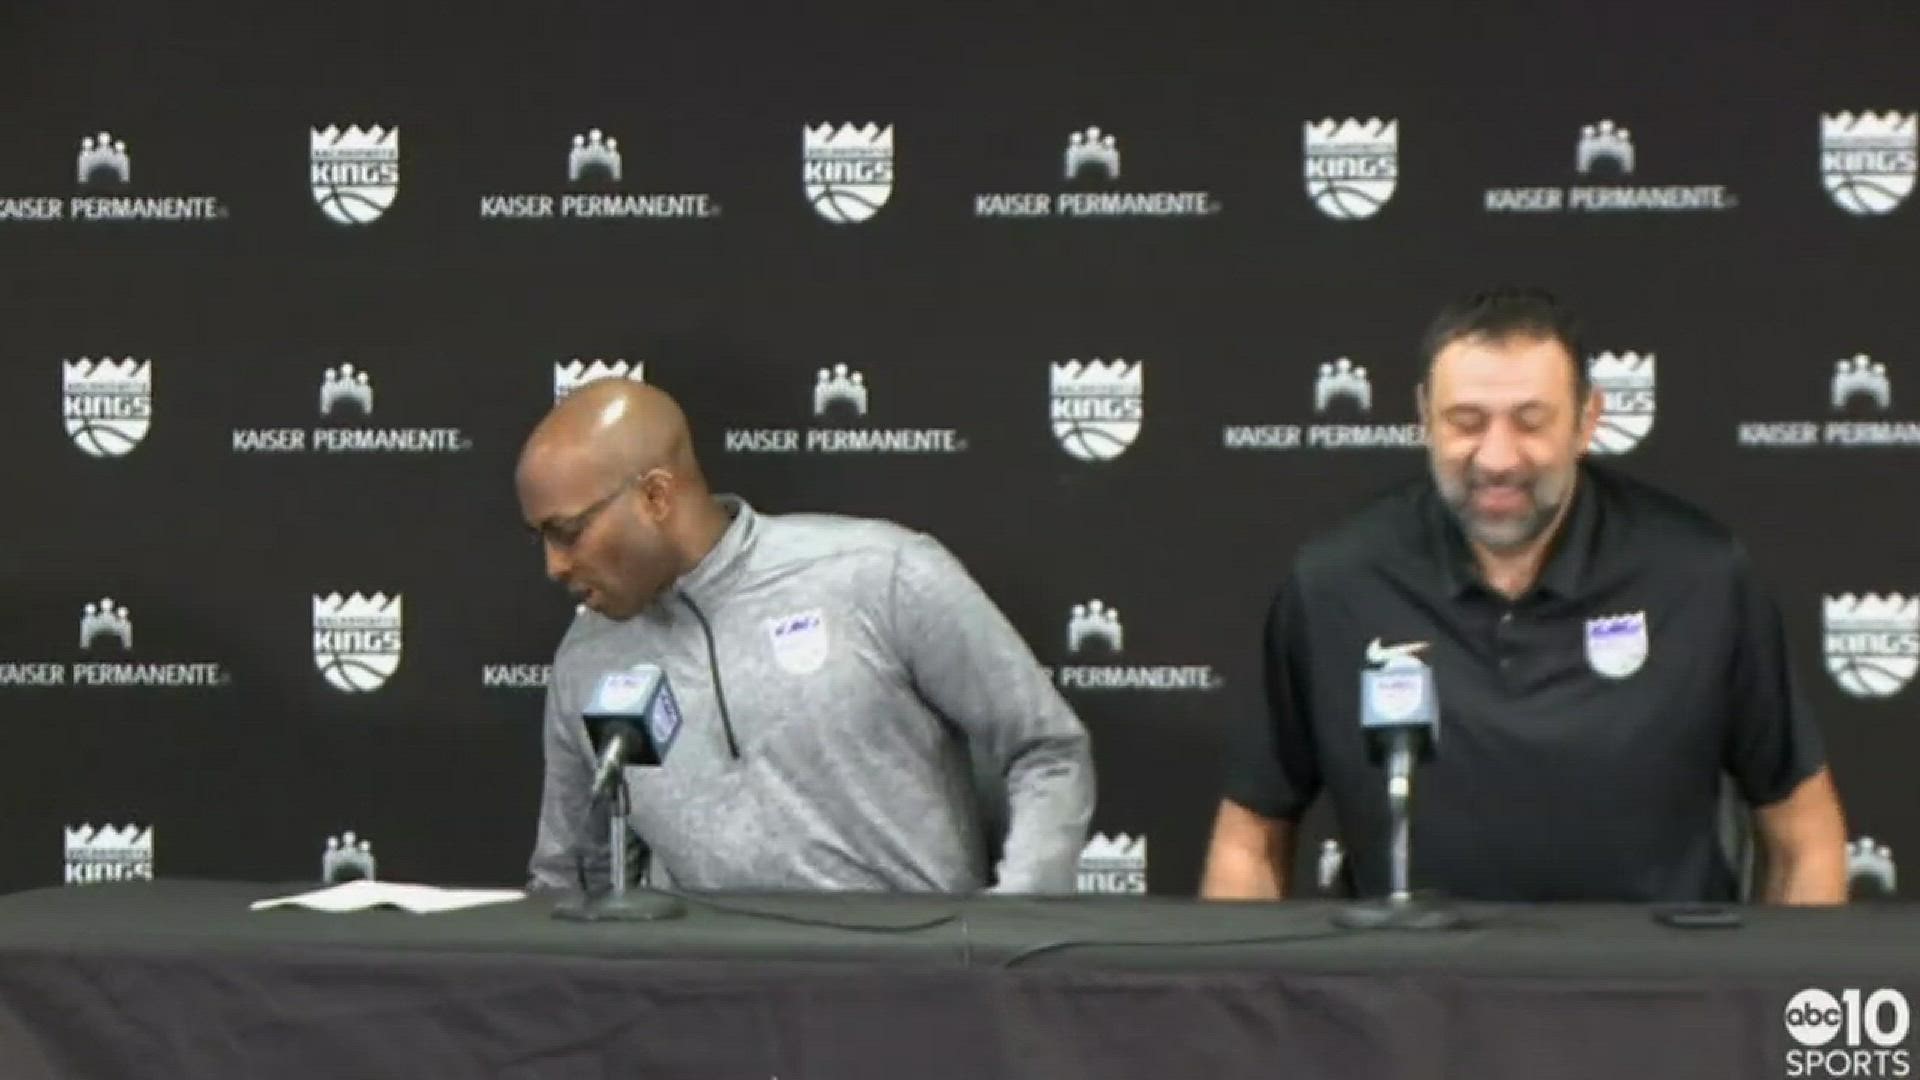 Full press conference from Friday with Sacramento Kings general manager Vlade Divac (right) and Assistant GM Brandon Williams (left), discussing acquisition of Iman Shumpert, Joe Johnson, Bruno Caboclo, the trade of George Hill and Malachi Richardson, and the decision to release Georgios Papagiannis.